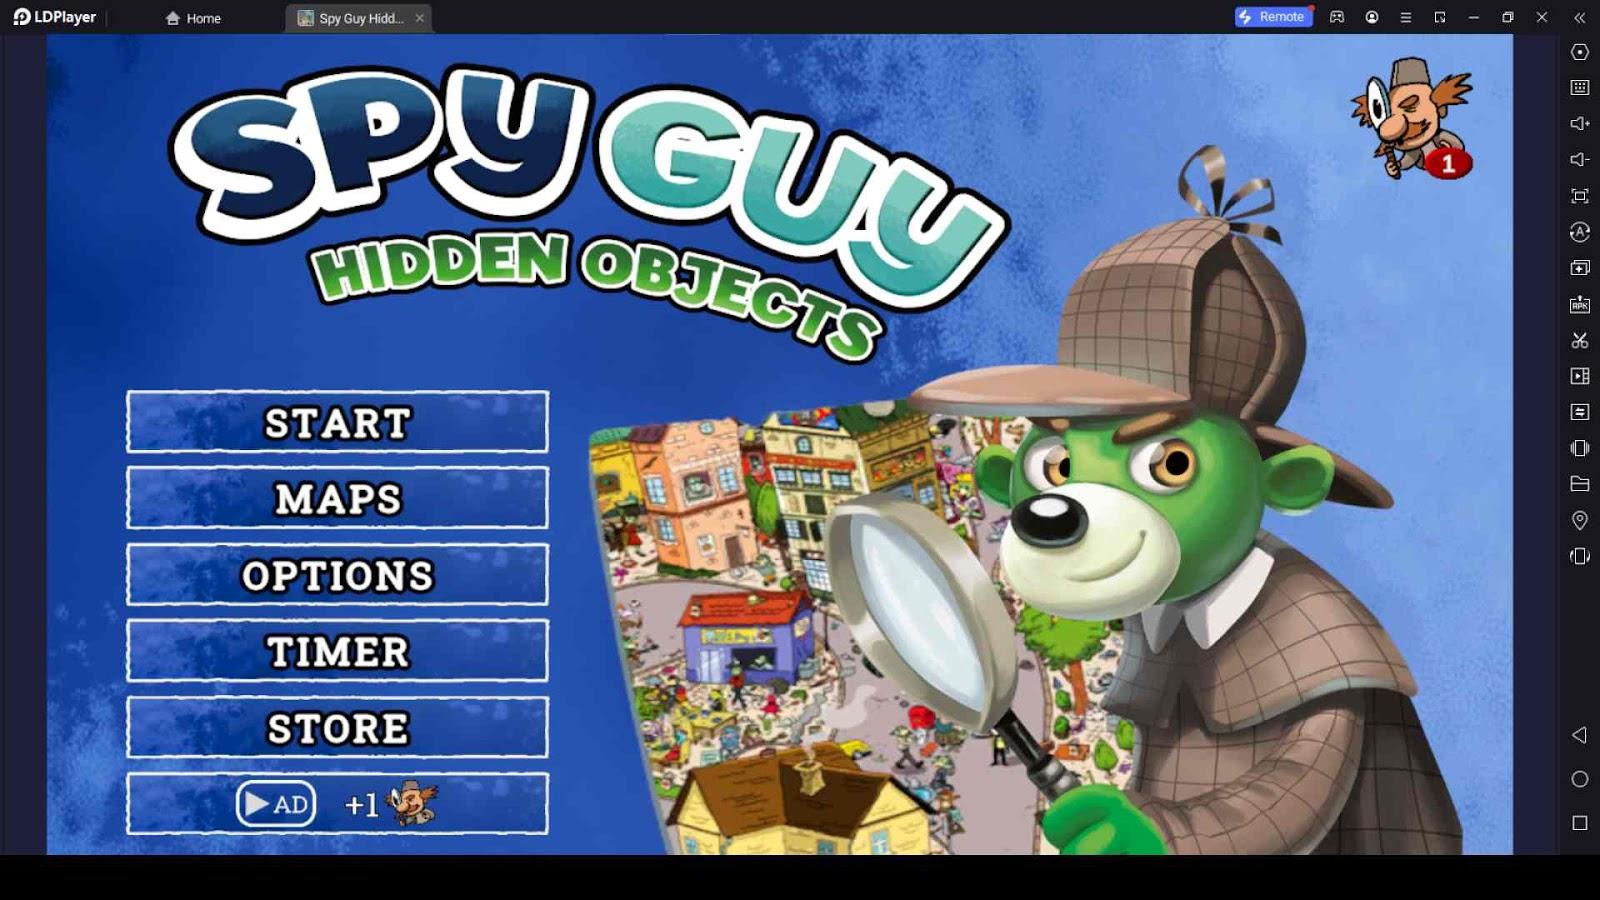 Spy Guy Hidden Objects Beginner Guide and Tips